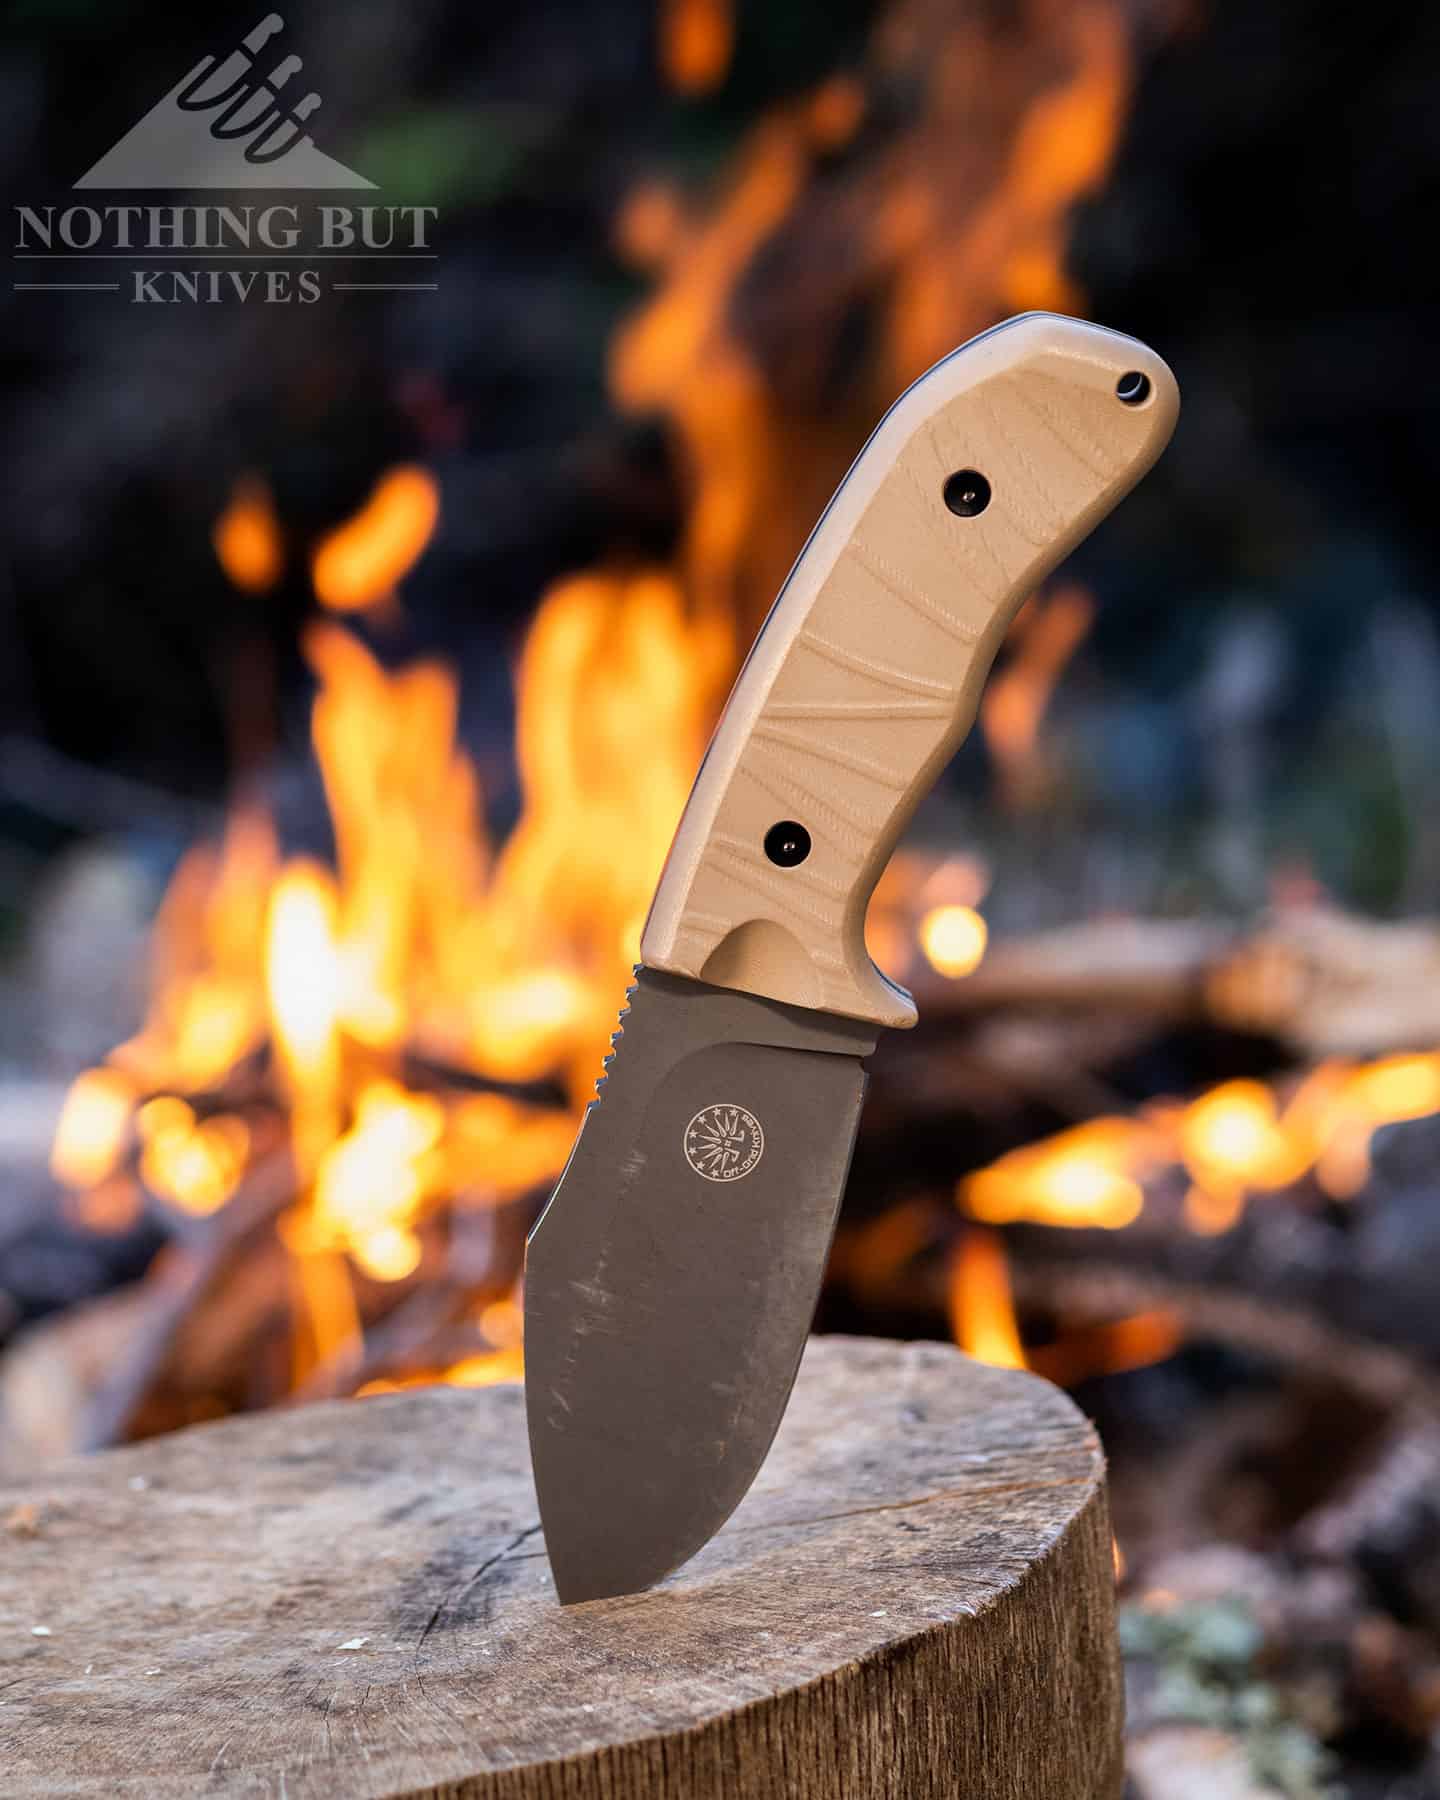 Chef Works Rain Series 6-inch Chef's Knife by Ken Onion 